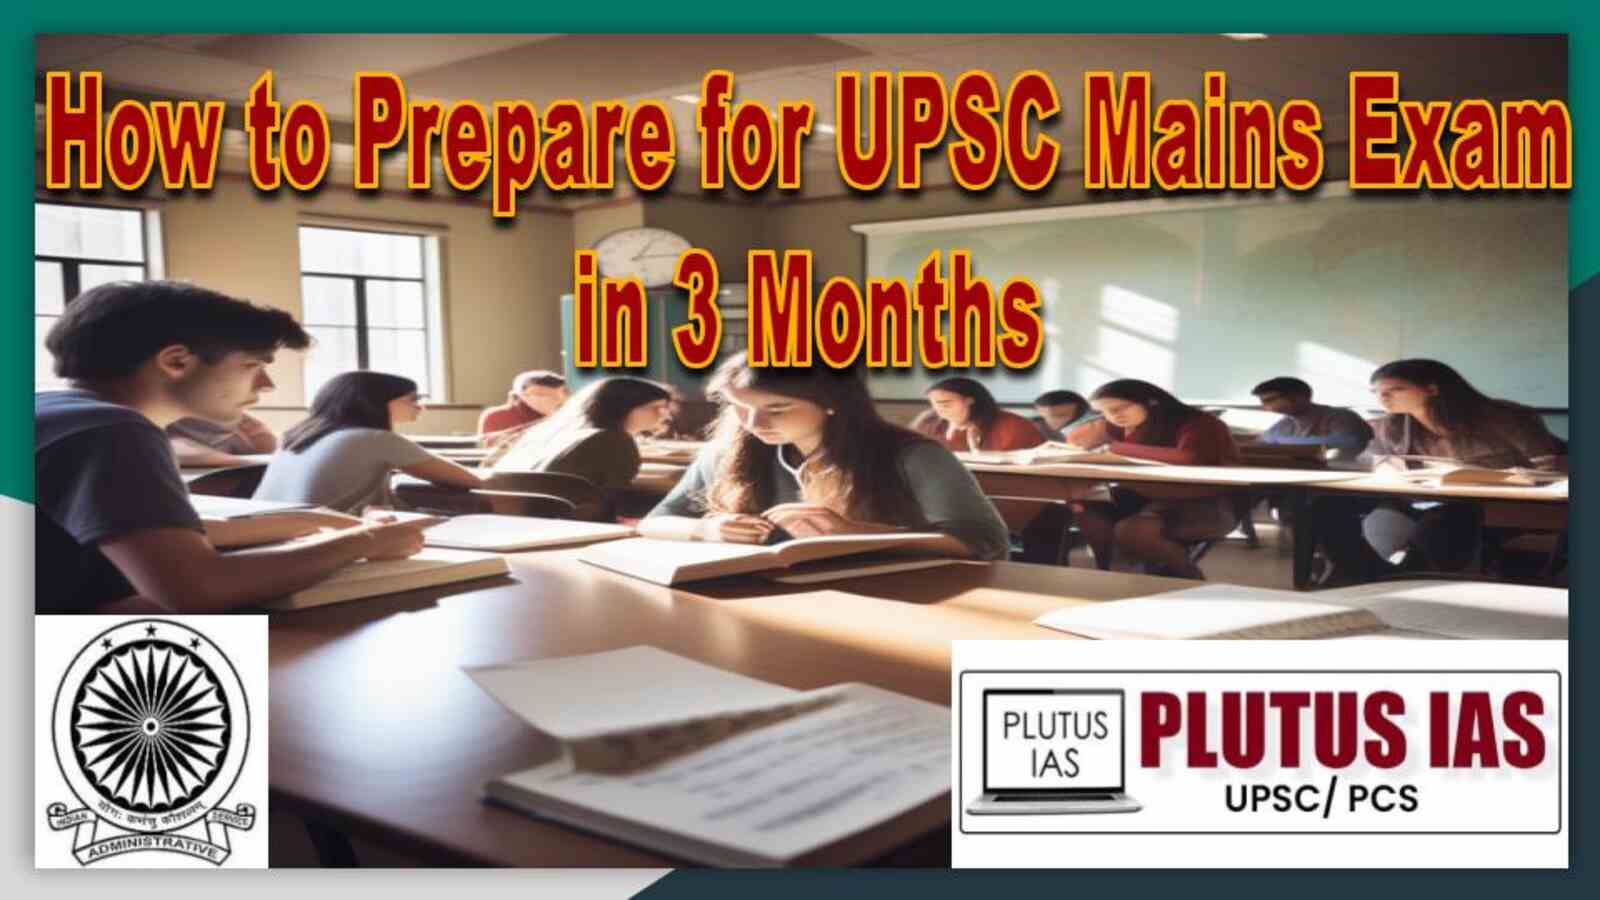 How to Prepare for UPSC Mains Exam in 3 months